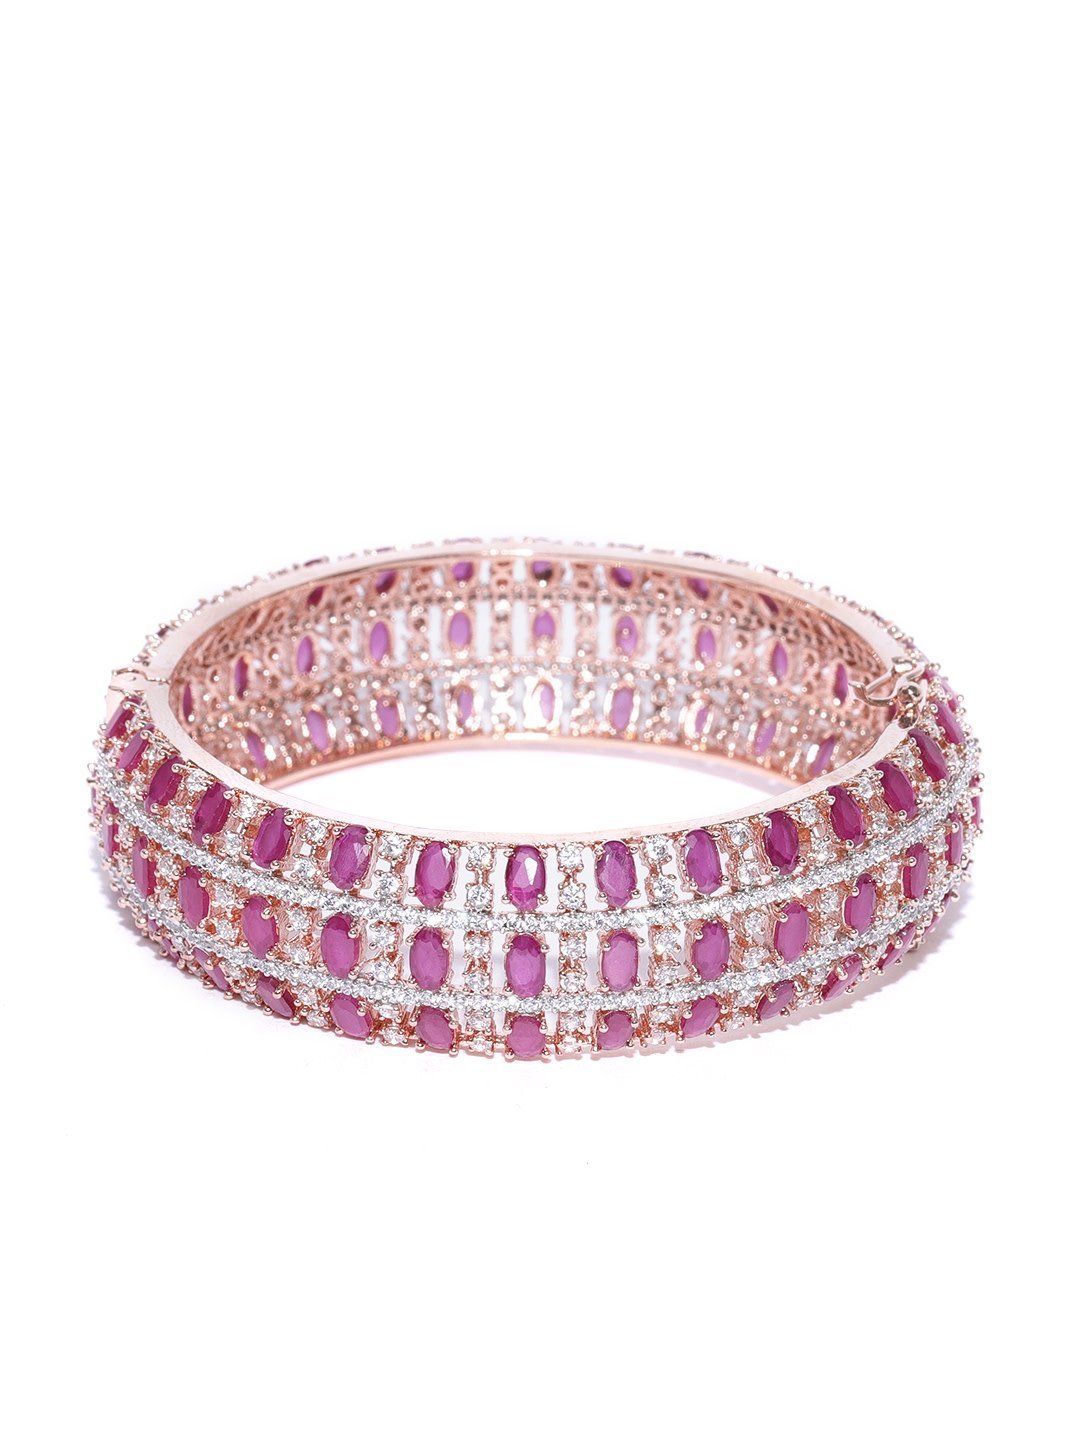 Women's Rose Gold-Plated American Diamond and Ruby Studded Kada Bracelet in Magenta And White Color - Priyaasi